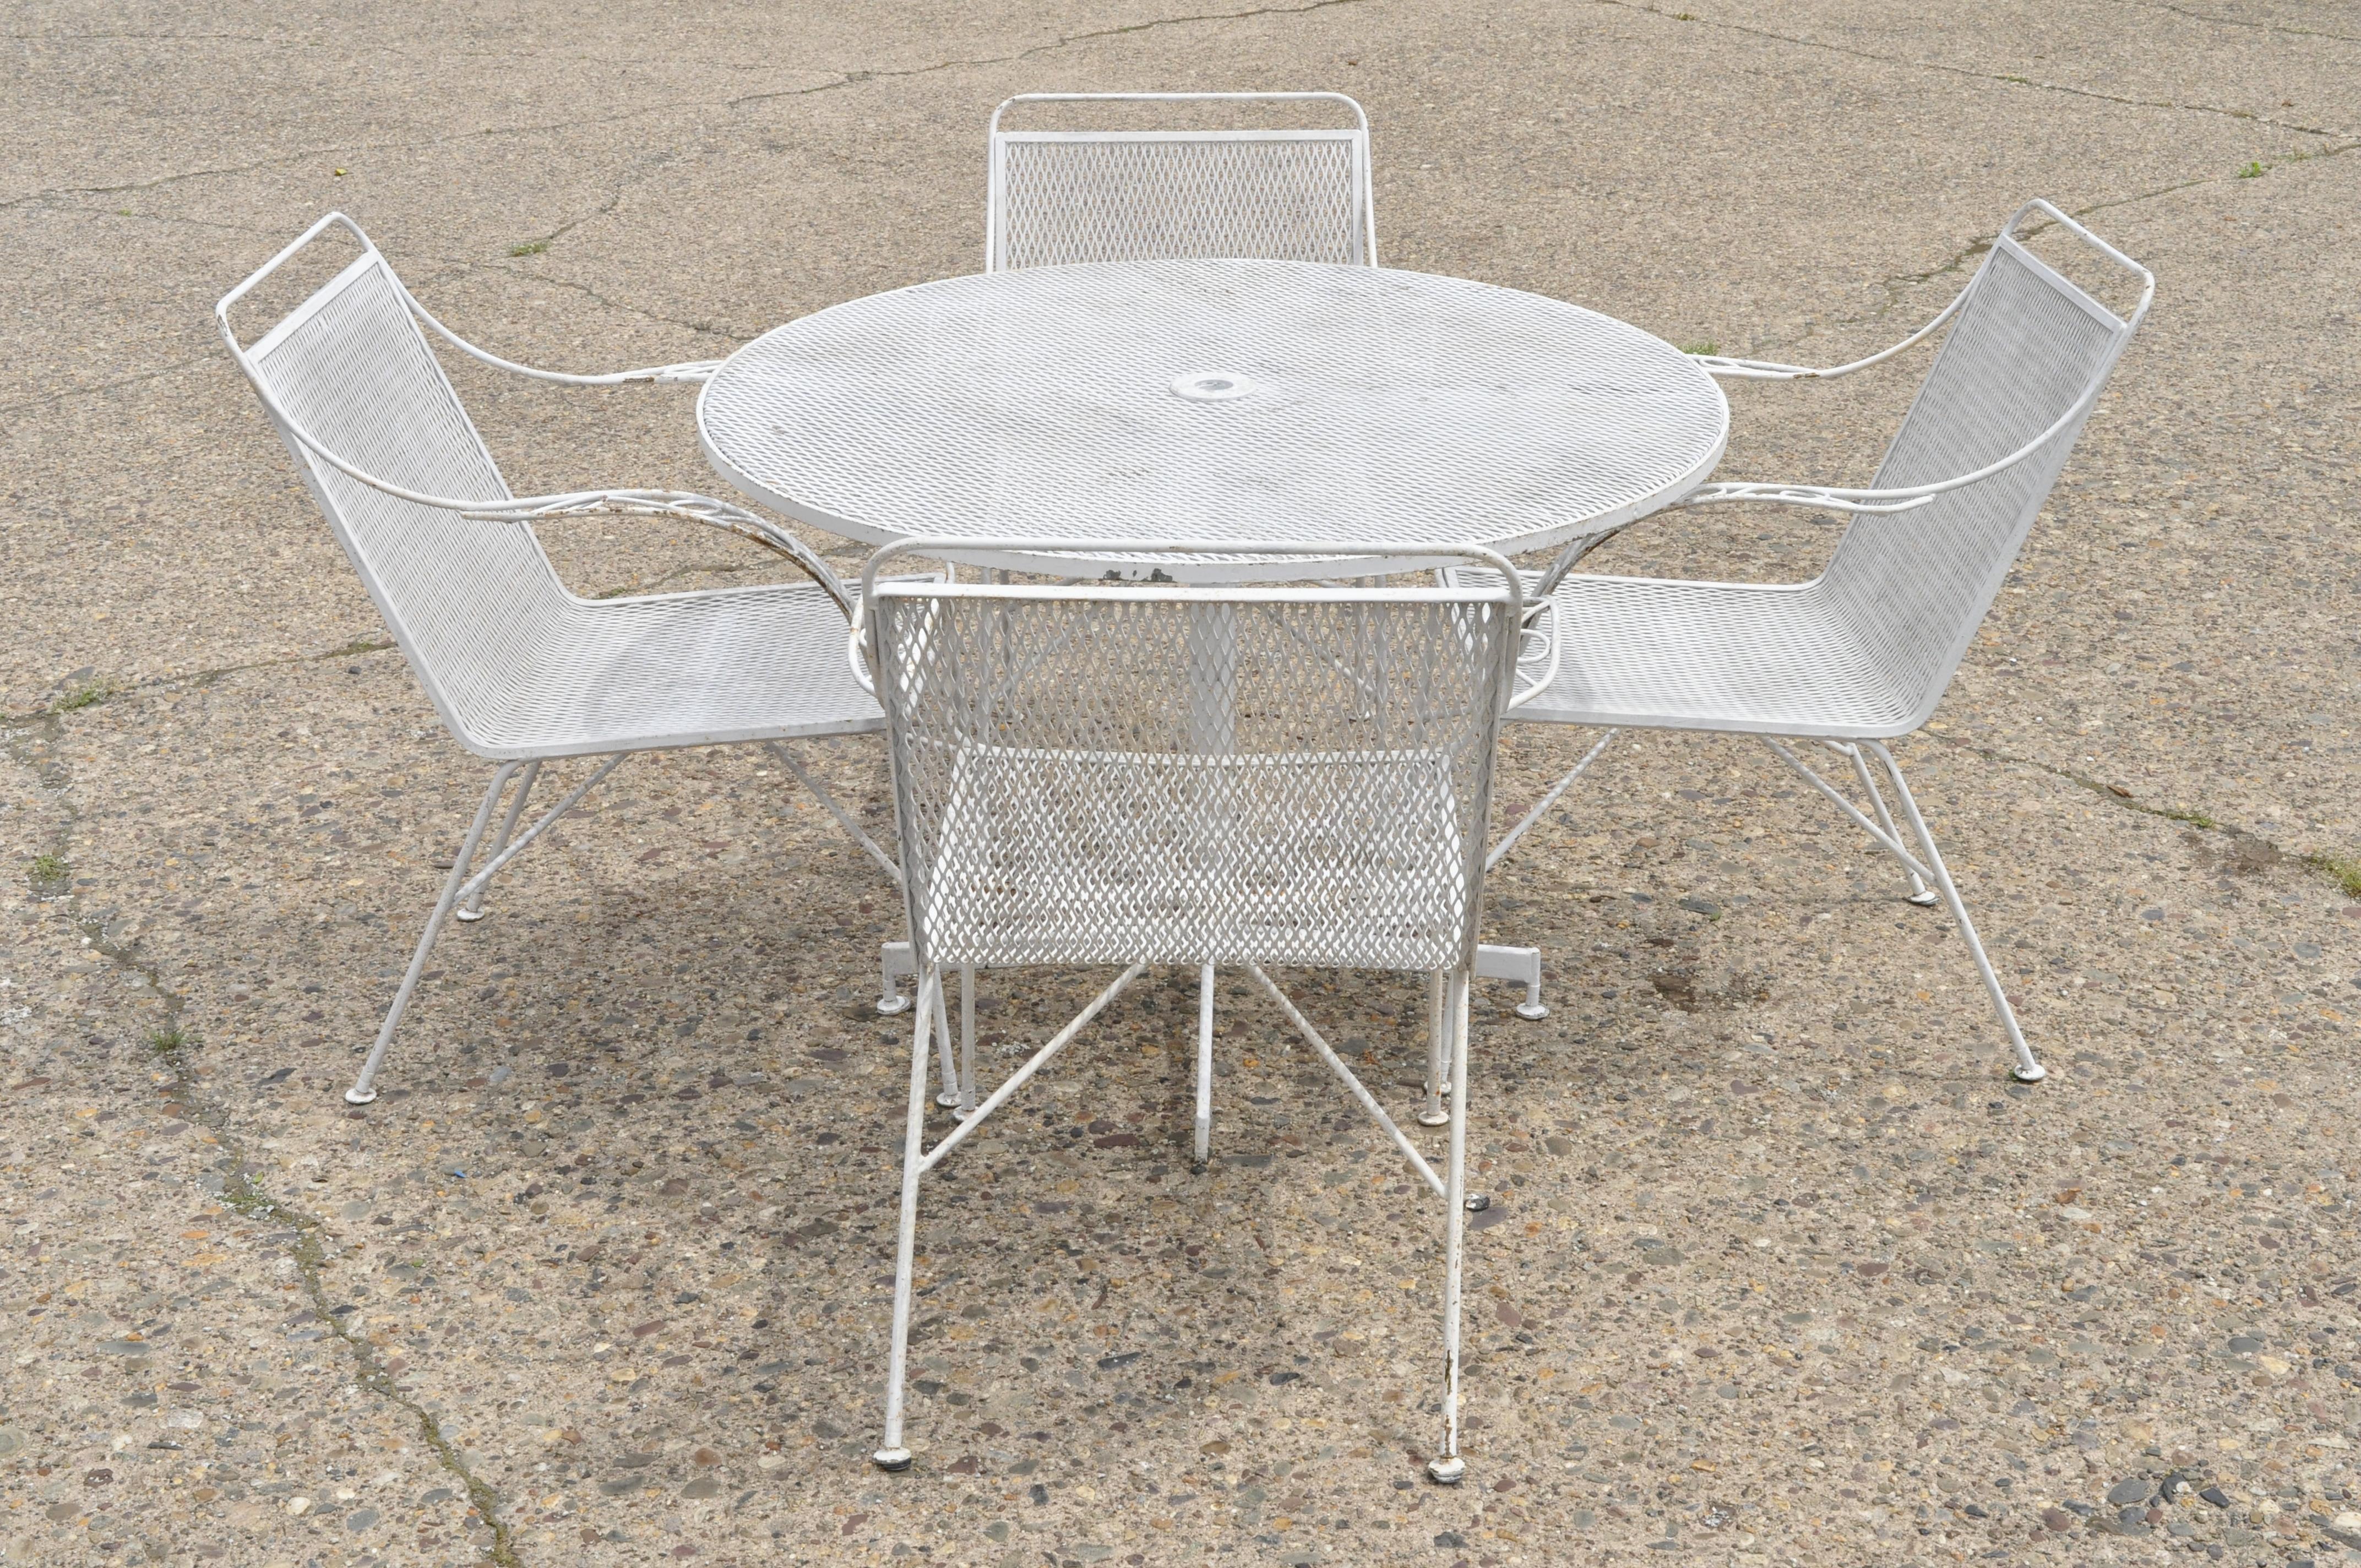 Mid-Century Modern wrought iron 5-piece patio garden dining set 4 chairs round table. Listing includes (4) chairs, (1) round table with pedestal base, unique stretcher base to chairs, wrought iron construction, clean modernist lines, quality